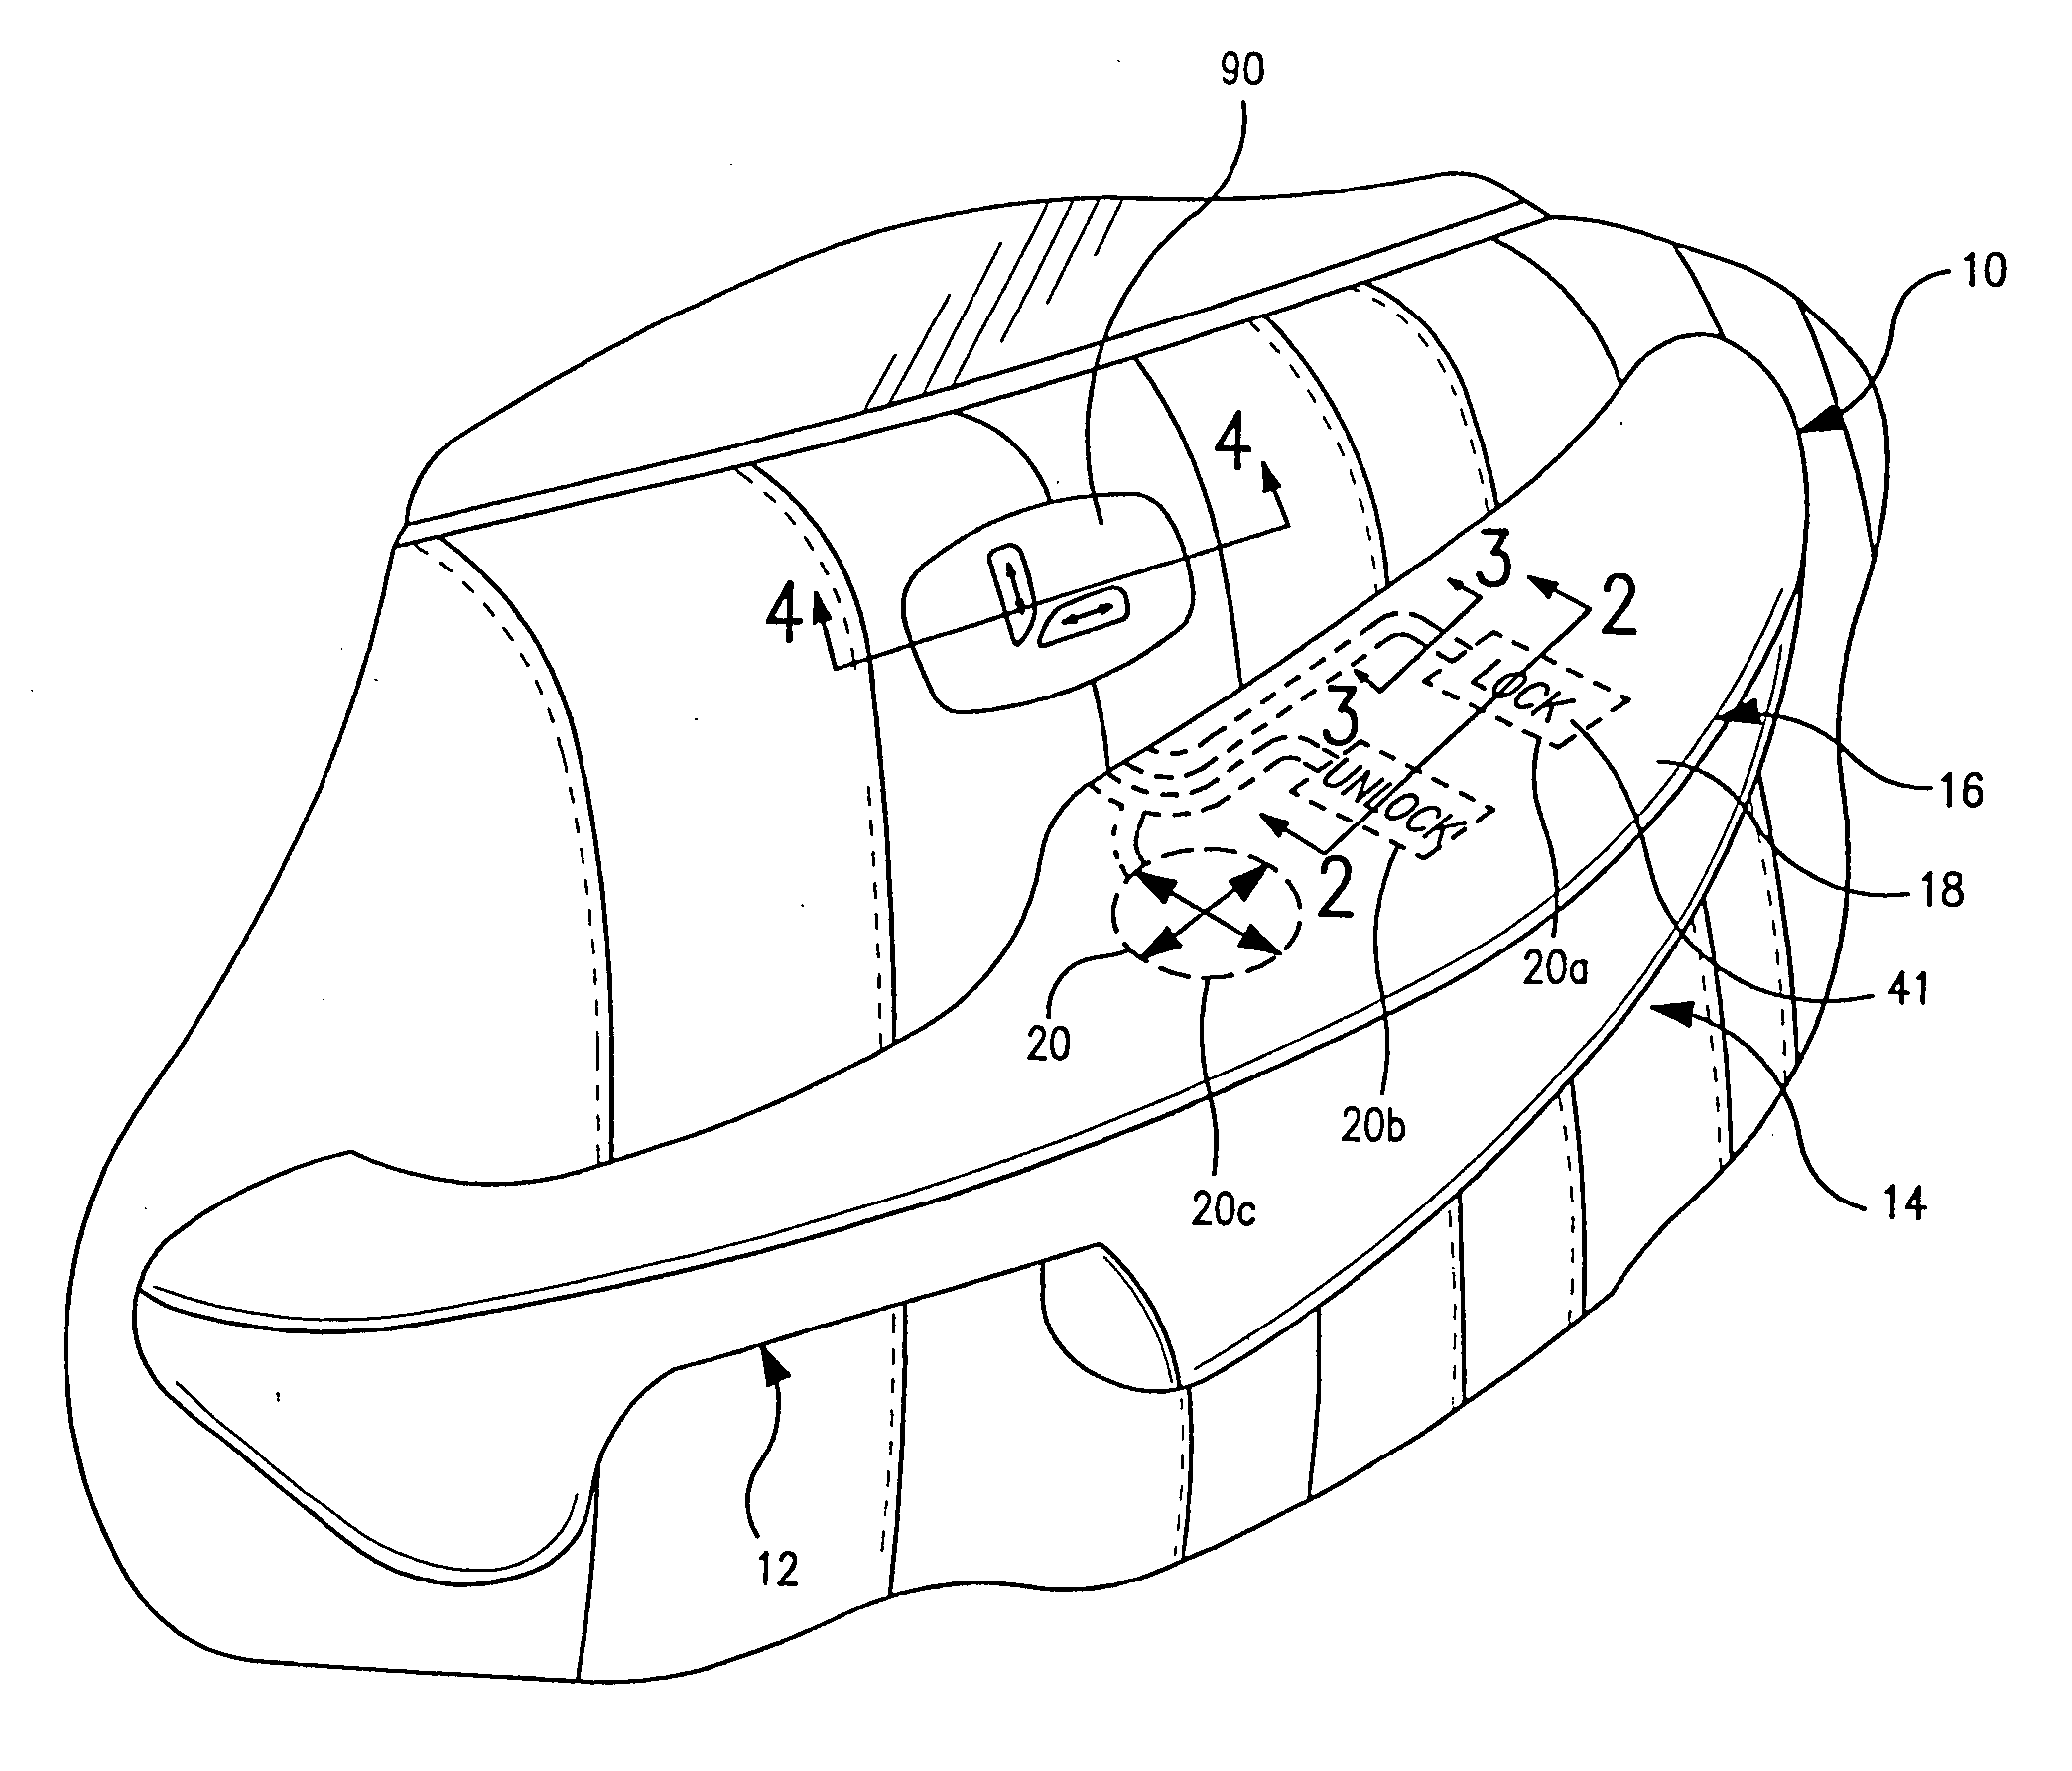 Method of marking a skin for a vehicle interior panel